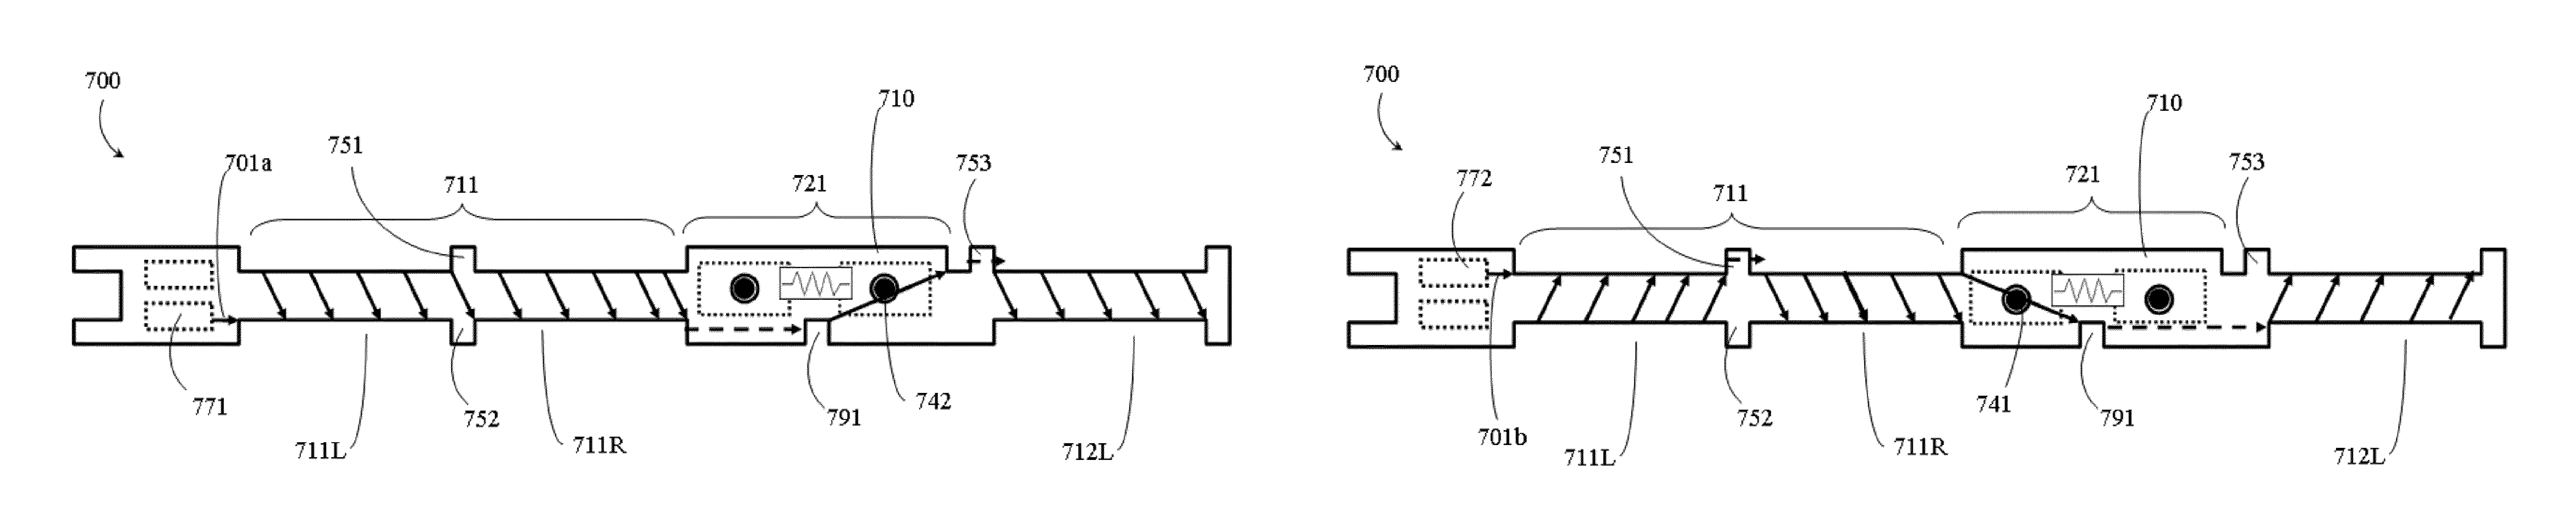 Input/output systems and devices for use with superconducting devices